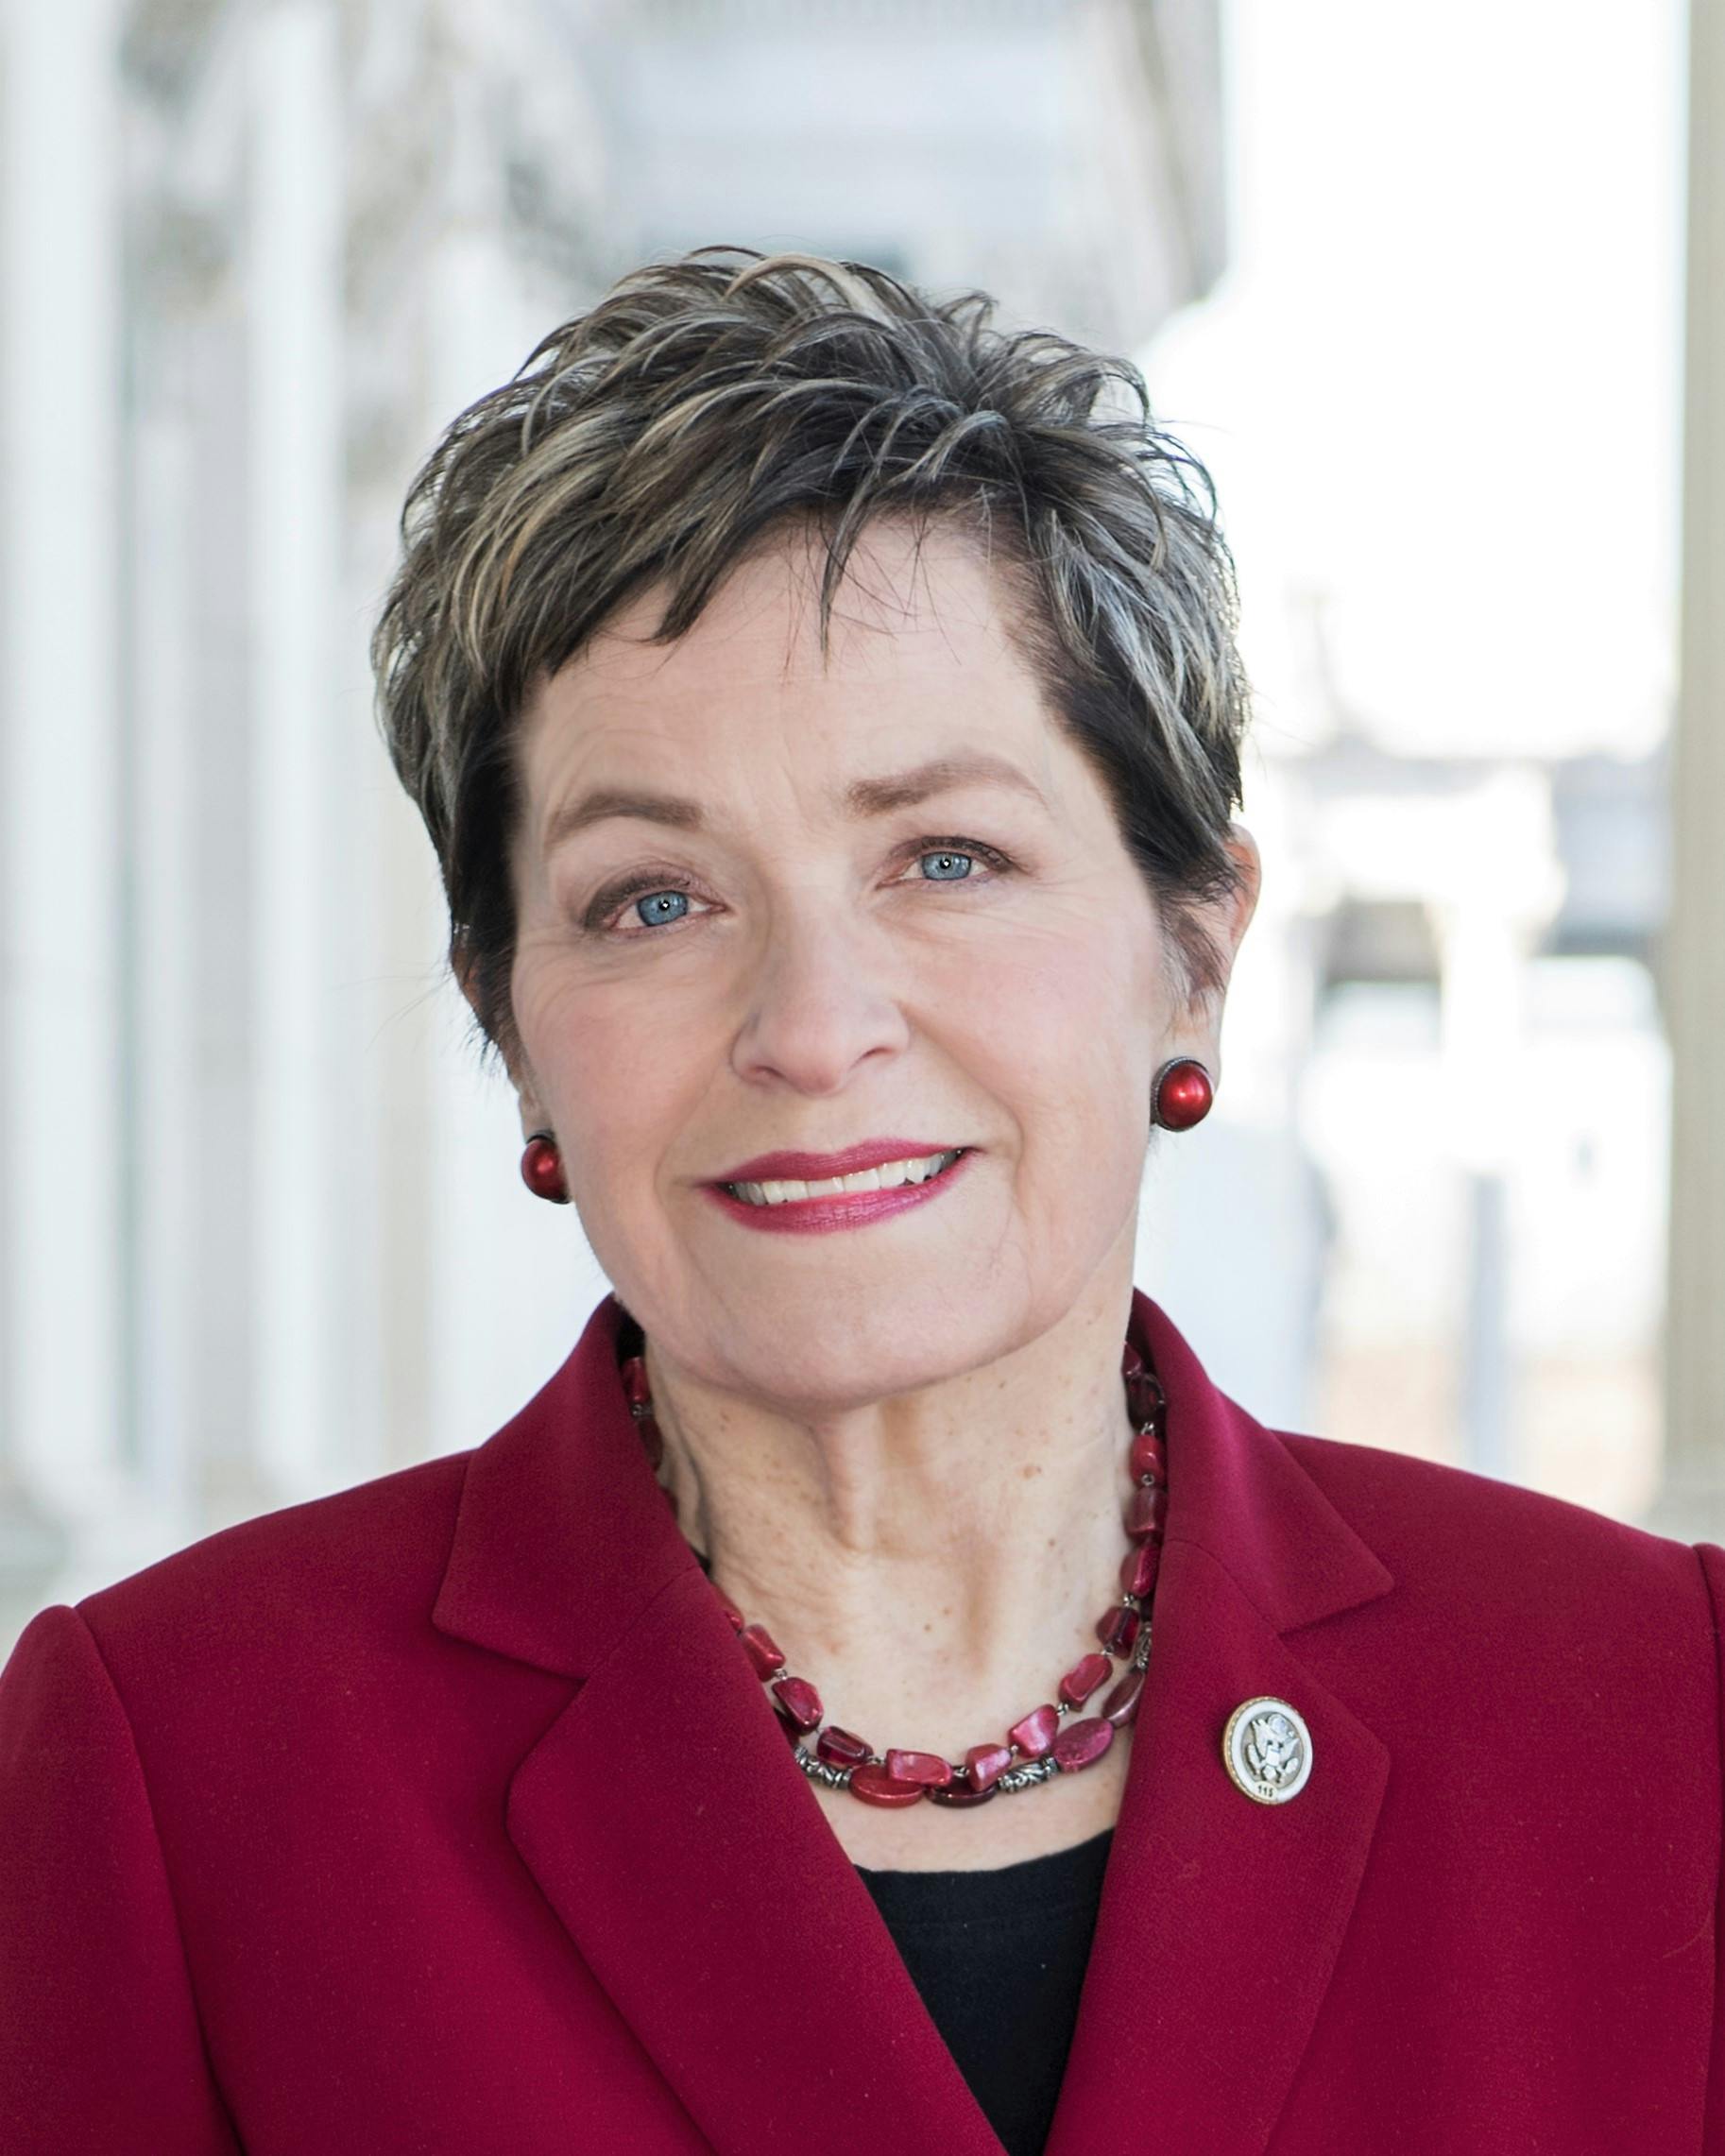 Profile picture of Marcy Kaptur